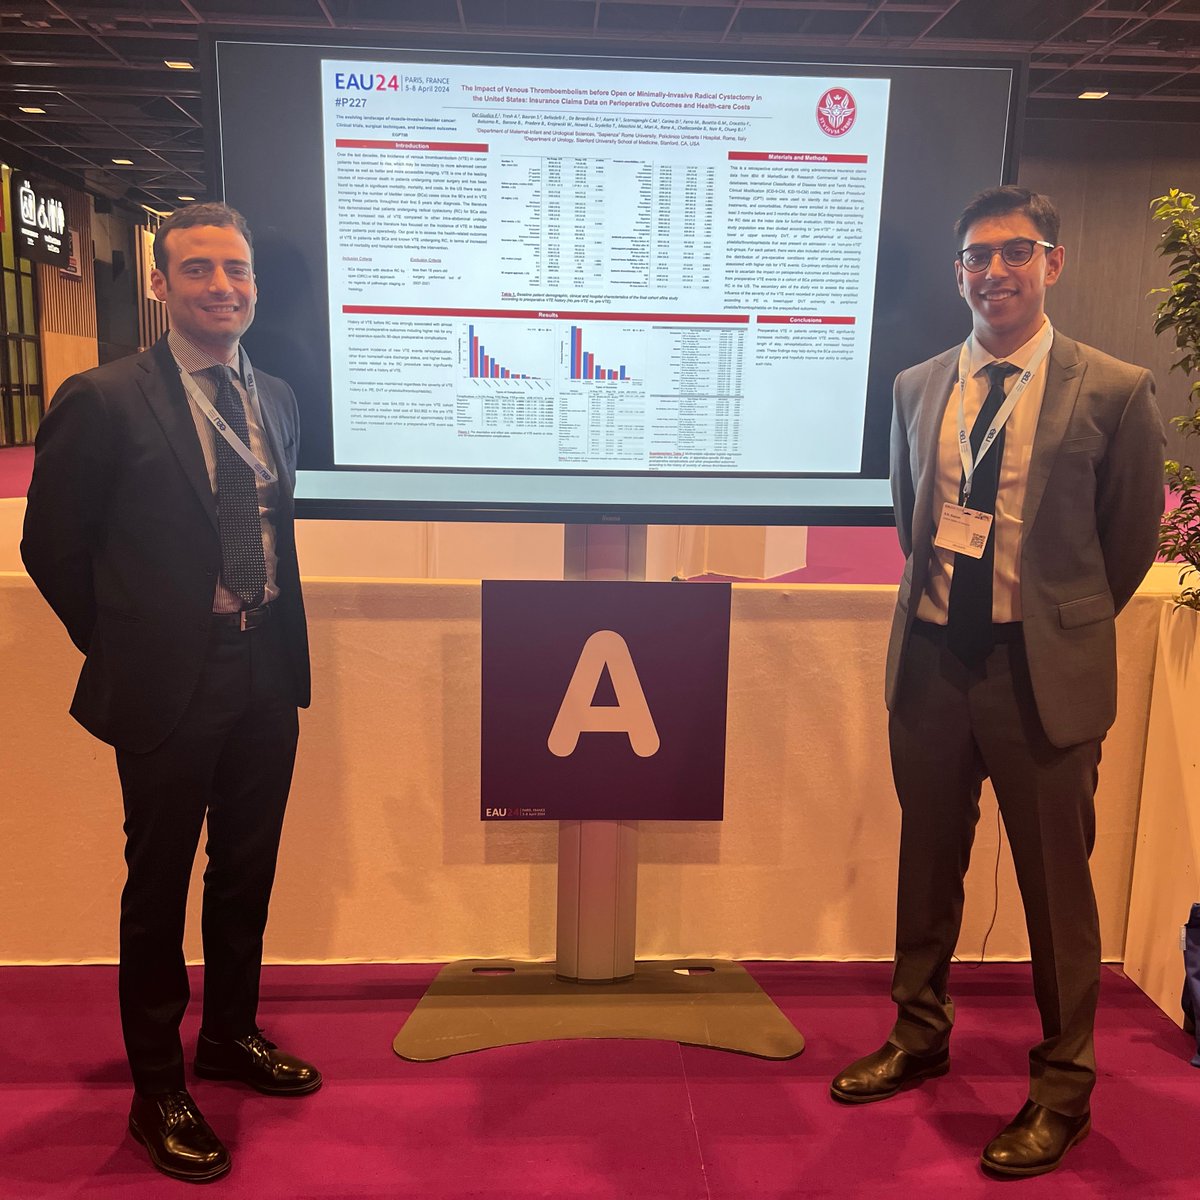 Great experience at #EAU24 presenting our work on the impact of VTE in patients undergoing radical cystectomy. Special thanks to @f_delgiudice, @DrBenjaminChung, and @StanfordUrology for this opportunity.